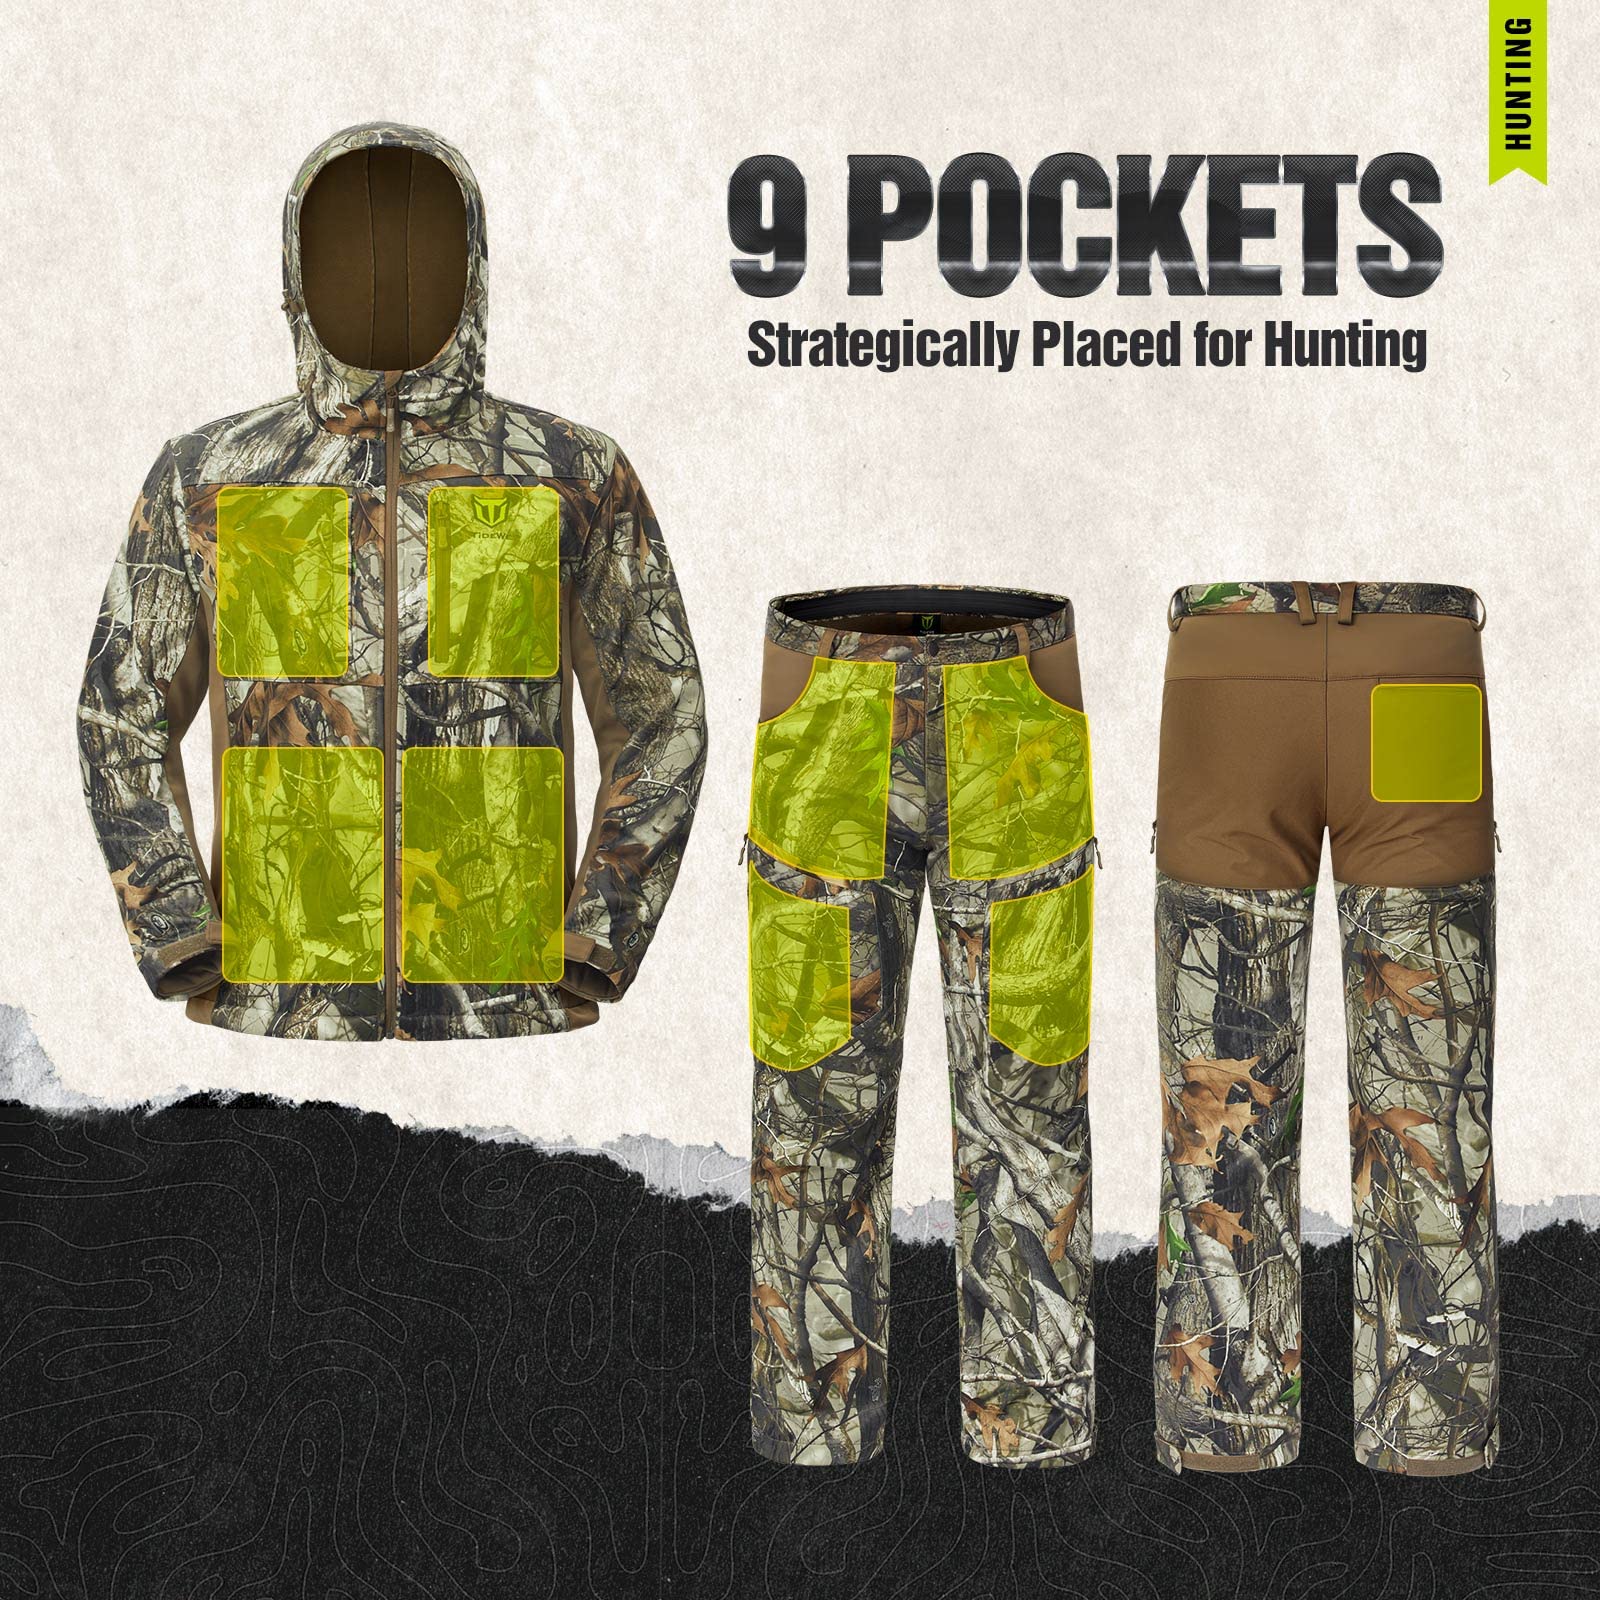 TIDEWE Hunting Clothes for Men with Fleece Lining, Safety Strap Compatible Water Resistant Silent Hunting Jacket and Pants